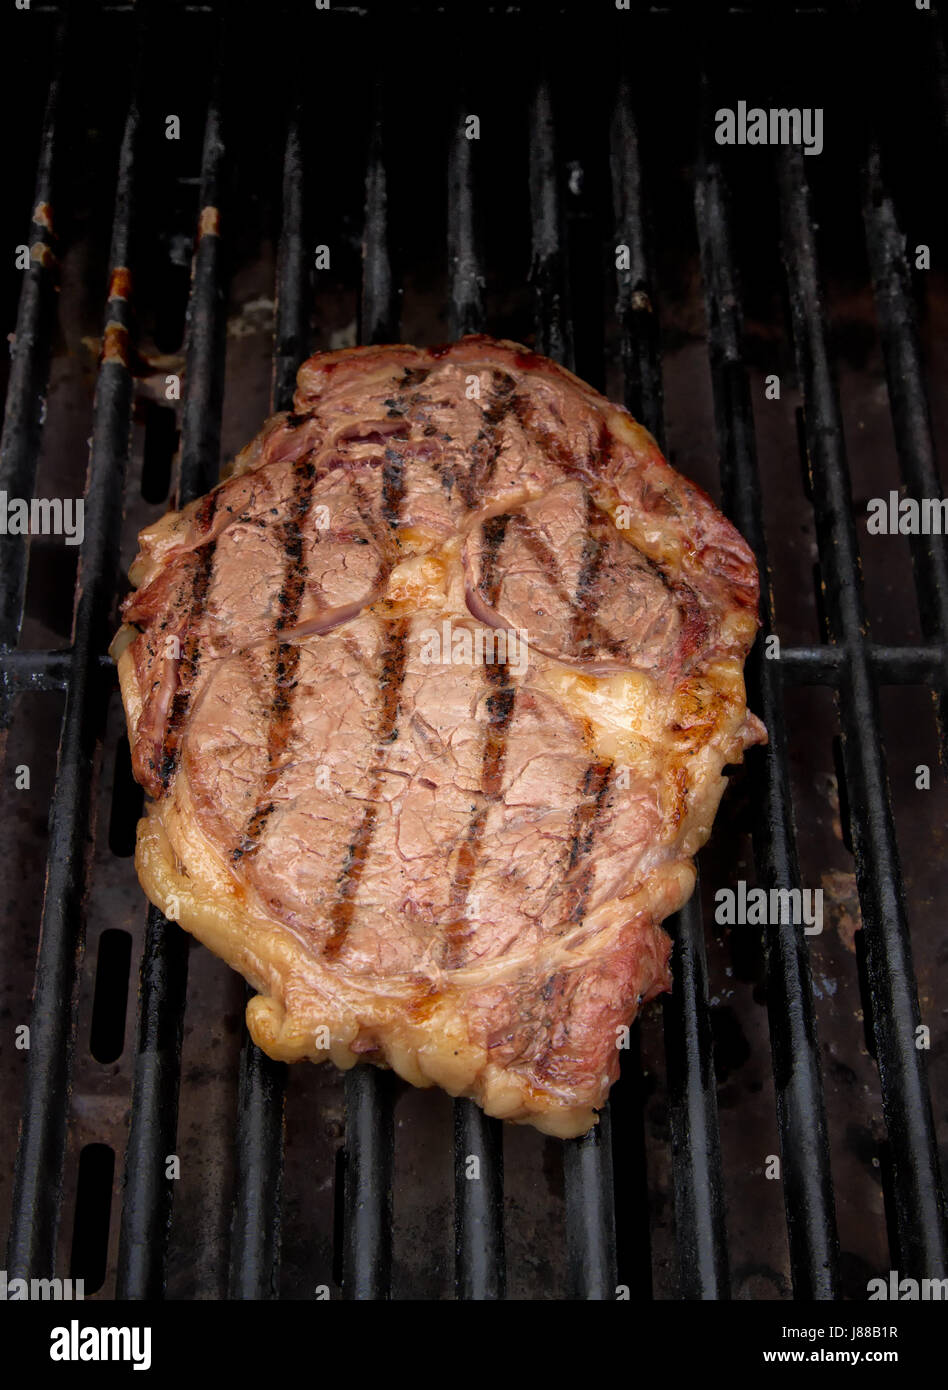 A seared ribeye steak grilling on a gas grill Stock Photo - Alamy